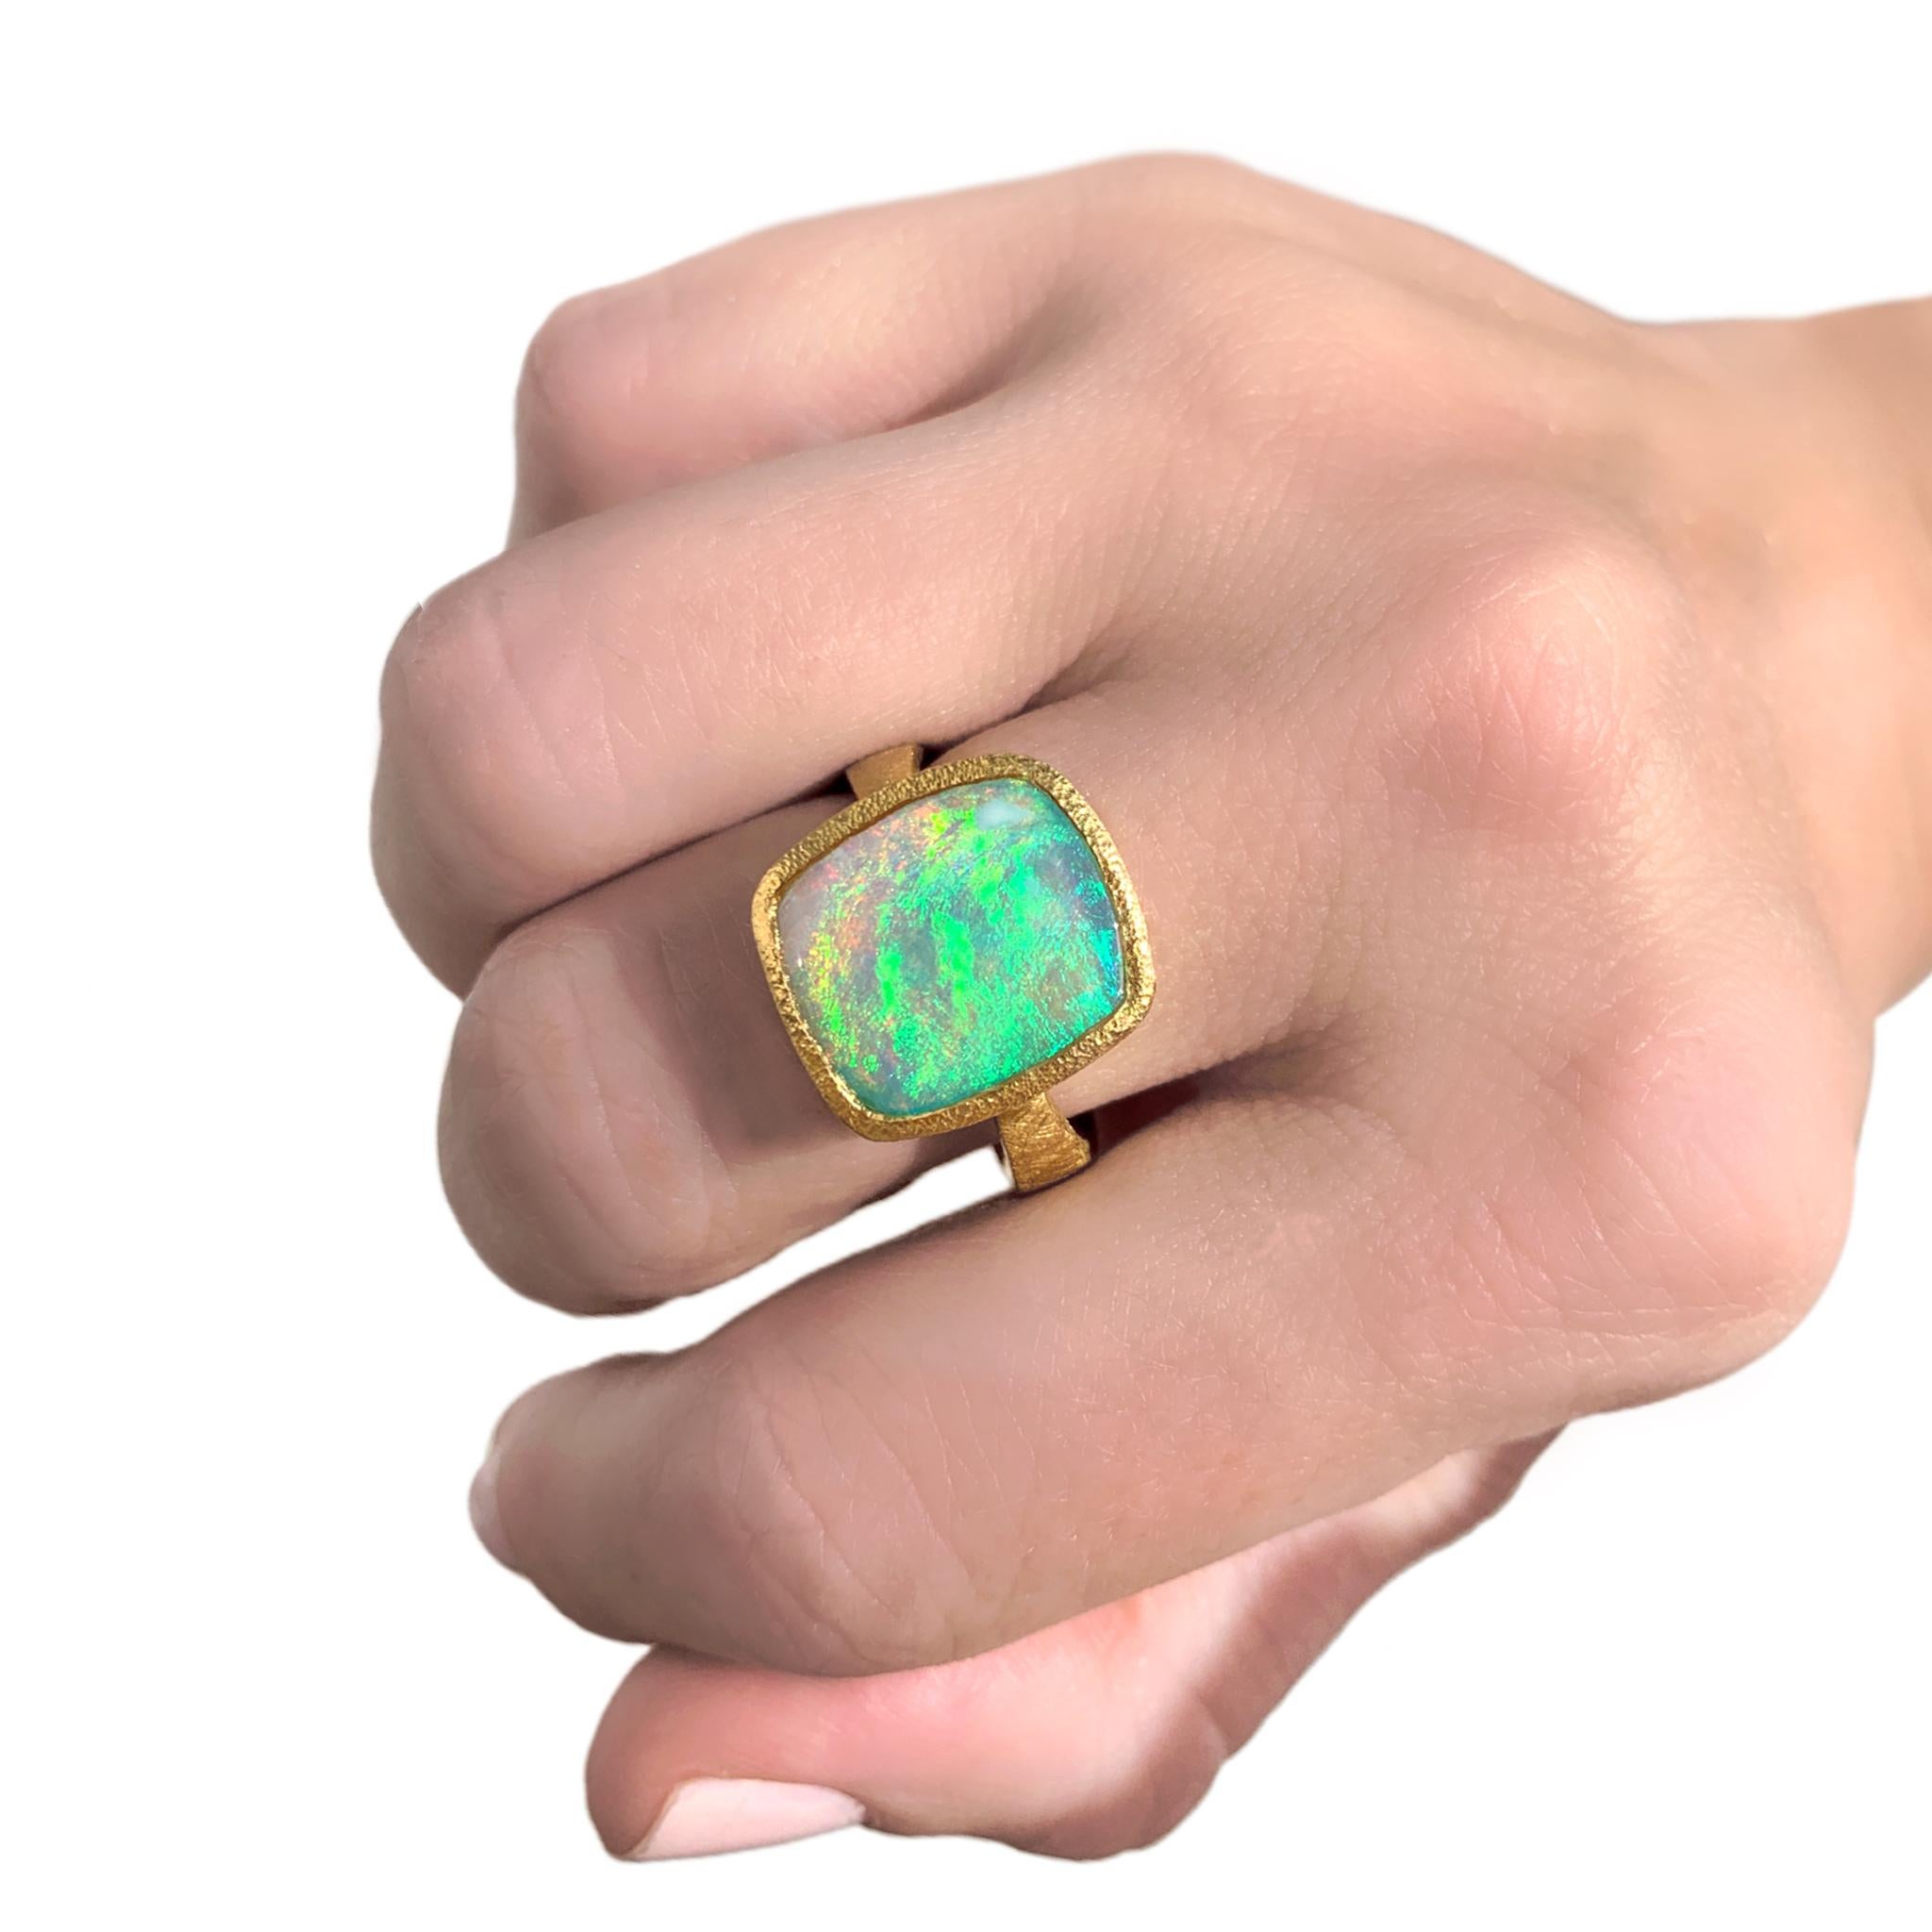 One of a Kind Ring by acclaimed jewelry maker Devta Doolan showcasing a spectacular cushion shaped Australian Lightning Ridge crystal opal, electrified by a bold green flash and full spectrum rainbow color-play. The gem opal is bezel-set in the